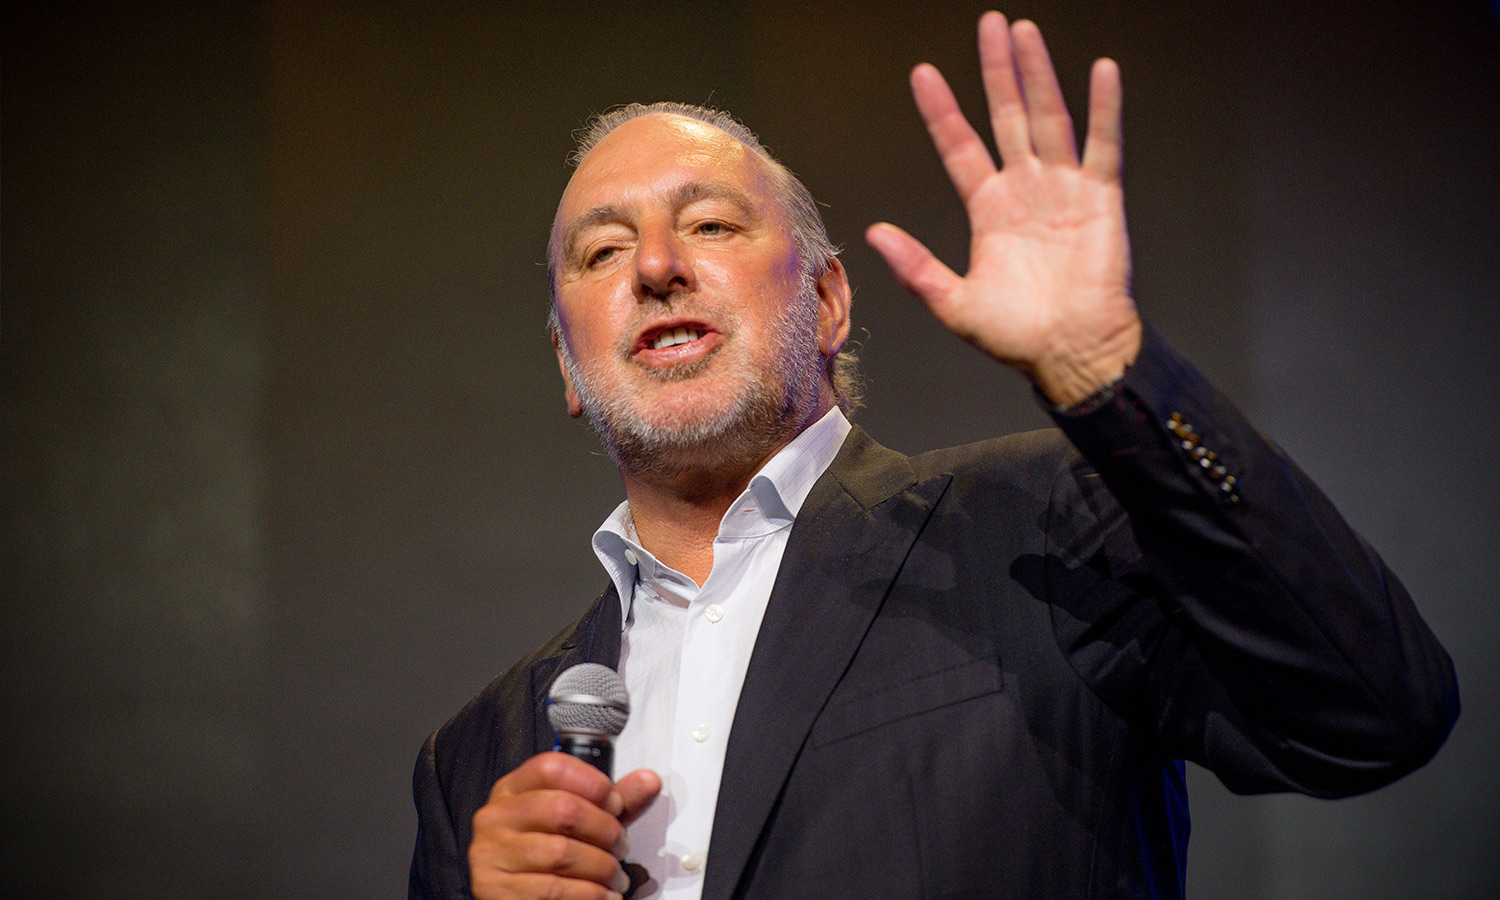 An image of Hillsong founder Brian Houston.